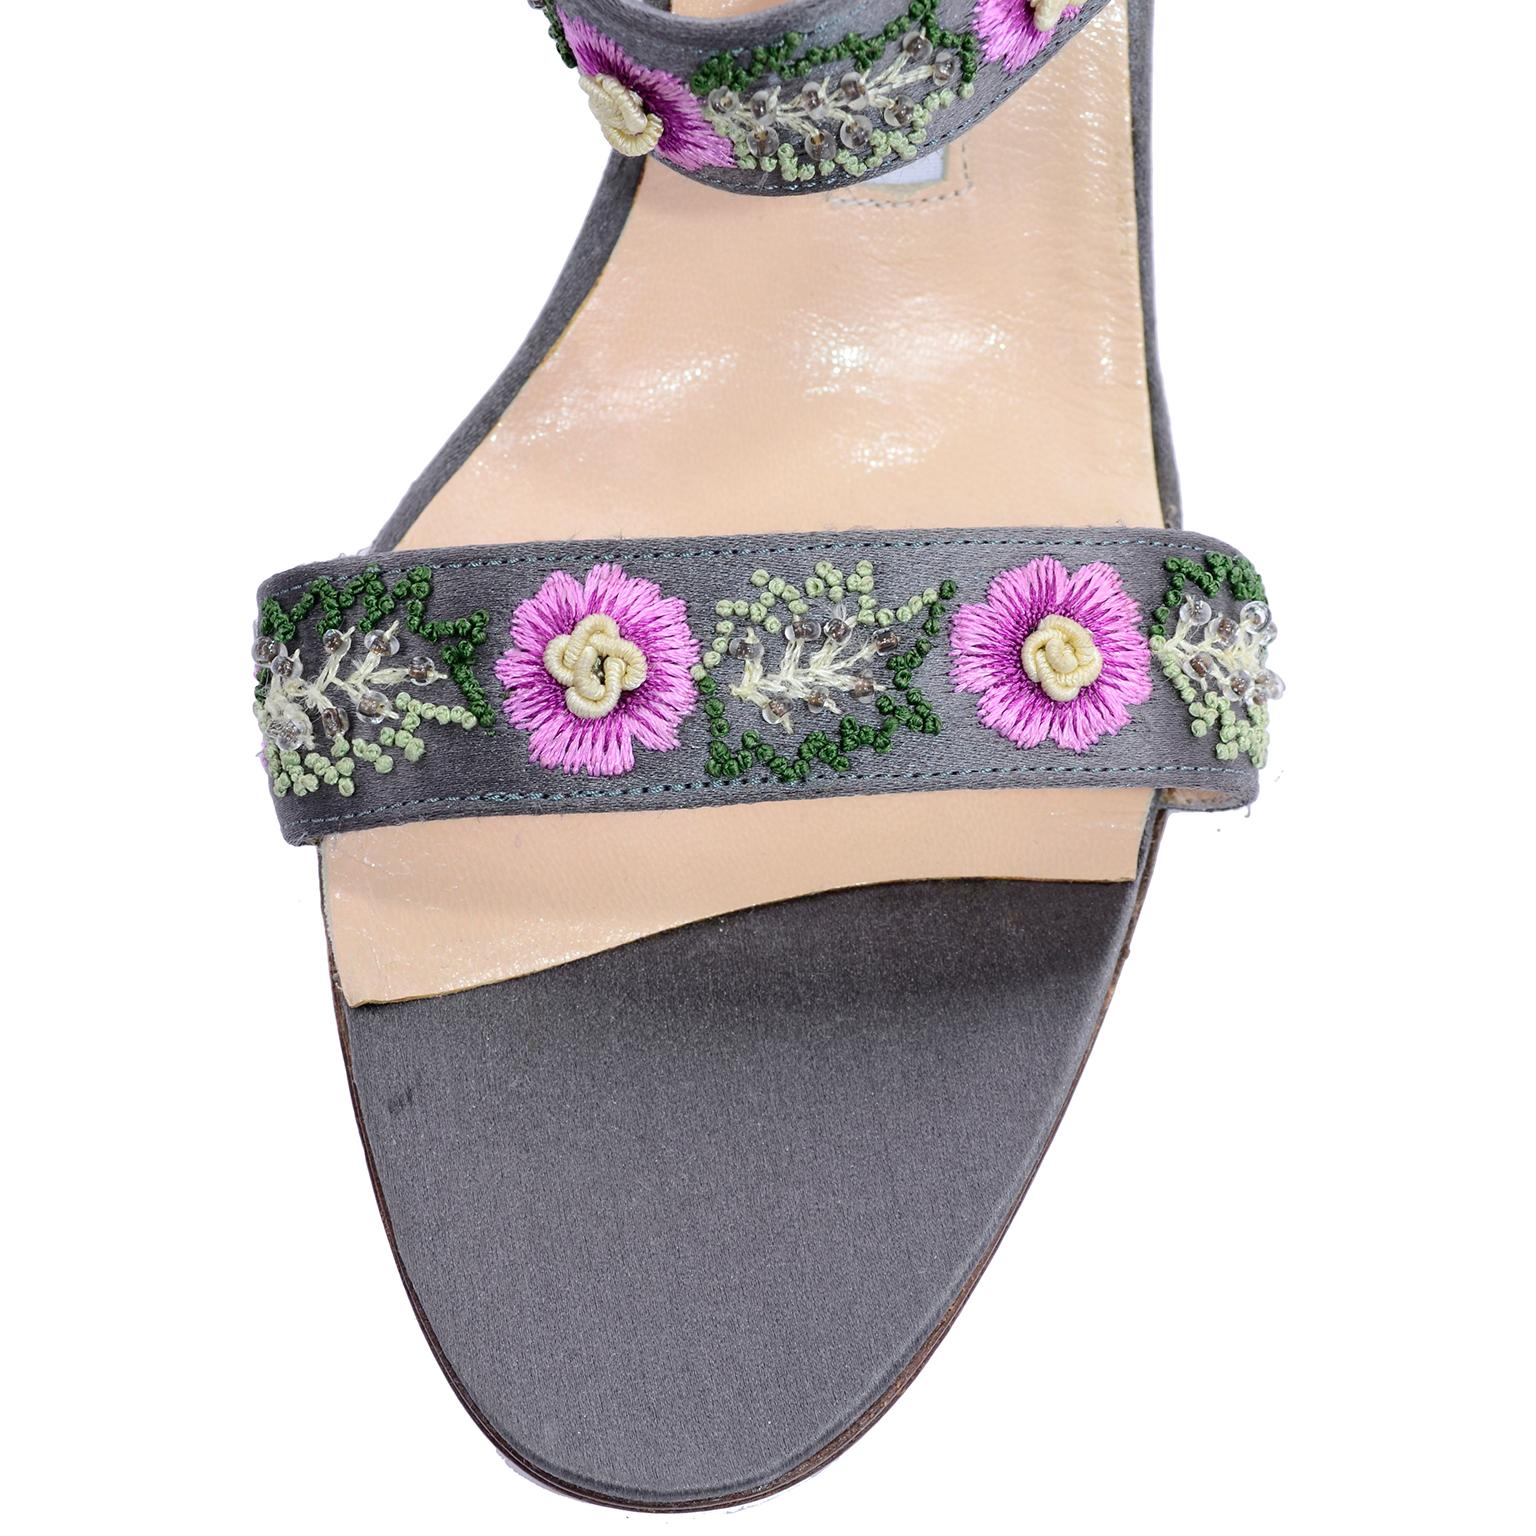 Manolo Blahnik Vintage Open Toe Beaded Slide Sandals W Pink Embroidered Flowers  In Excellent Condition For Sale In Portland, OR